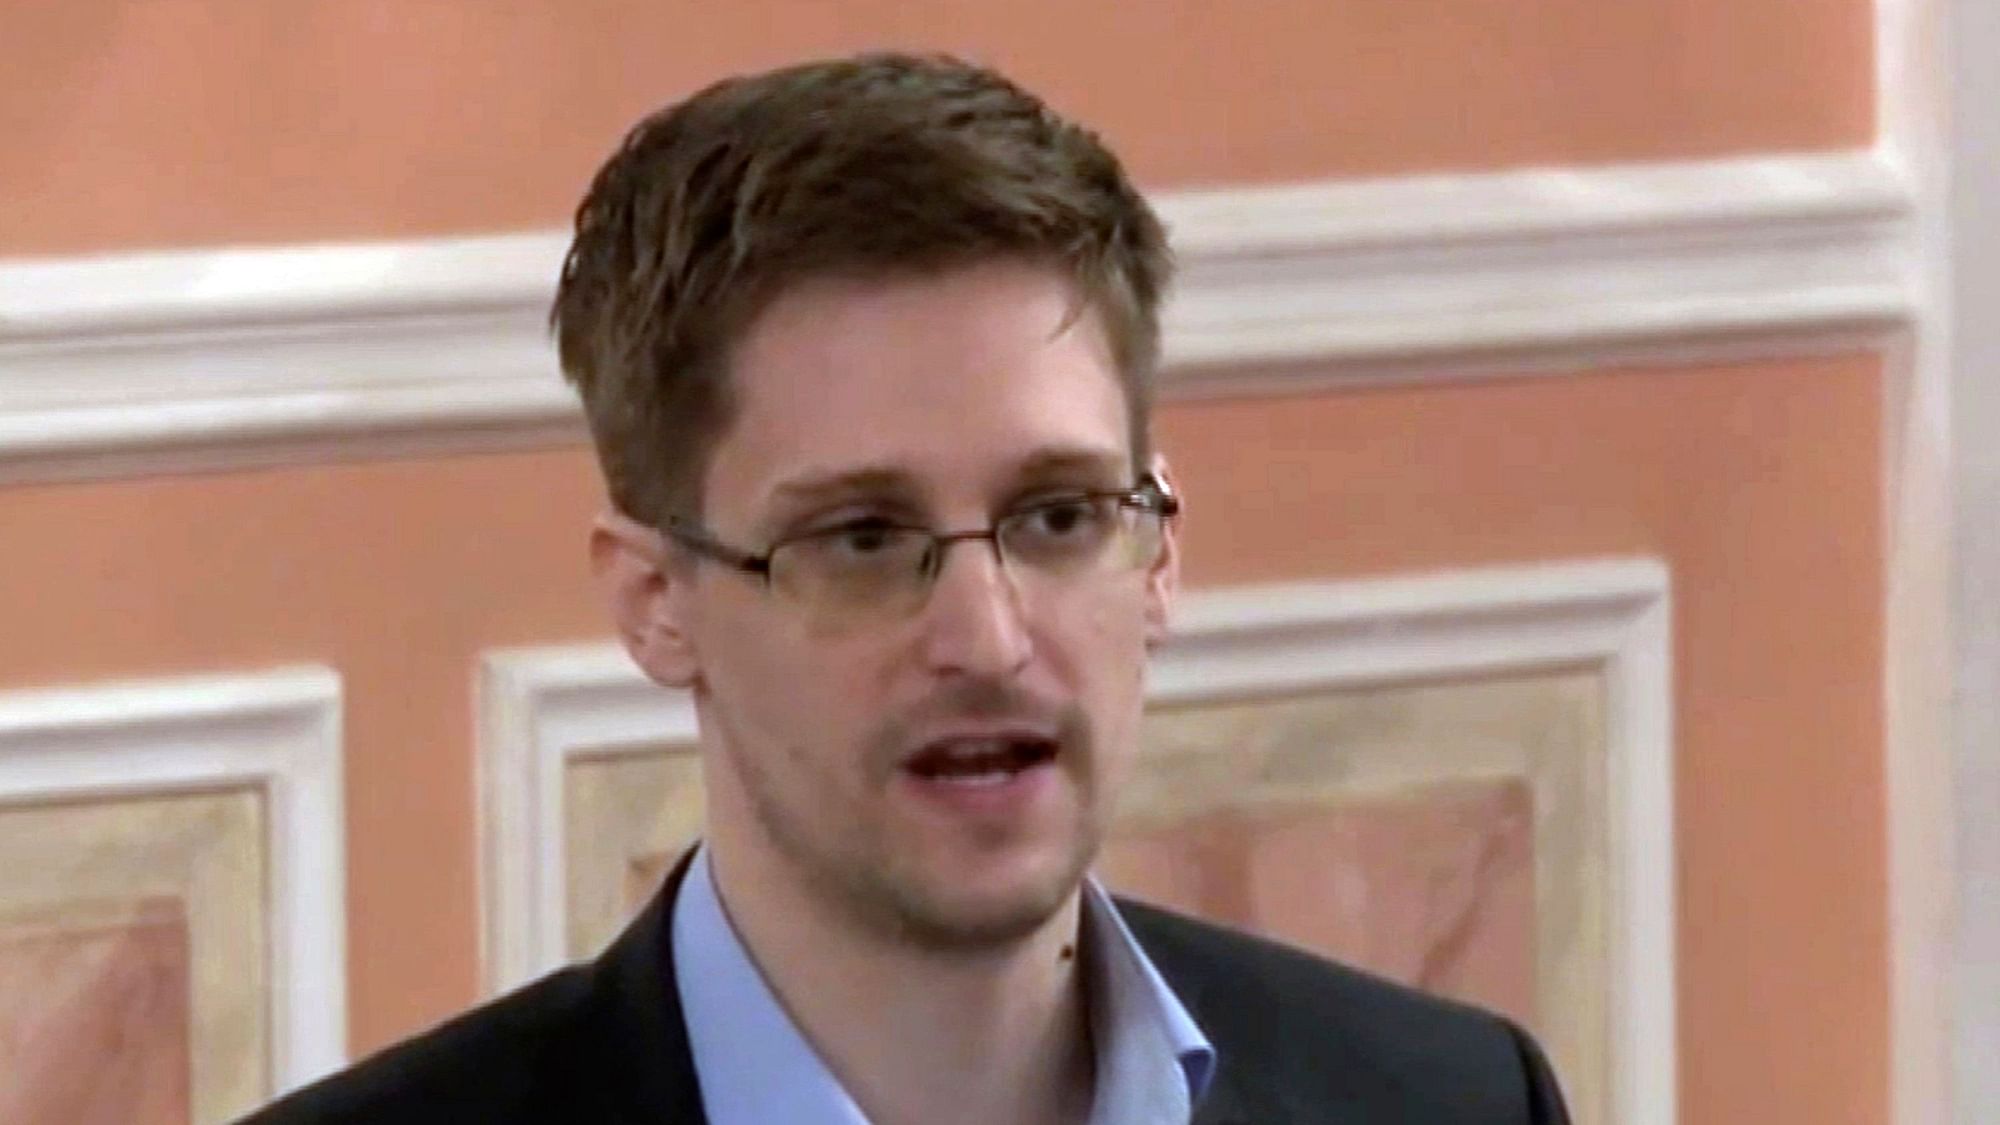 The US government filed a lawsuit Tuesday against former National Security Agency contractor Edward Snowden.